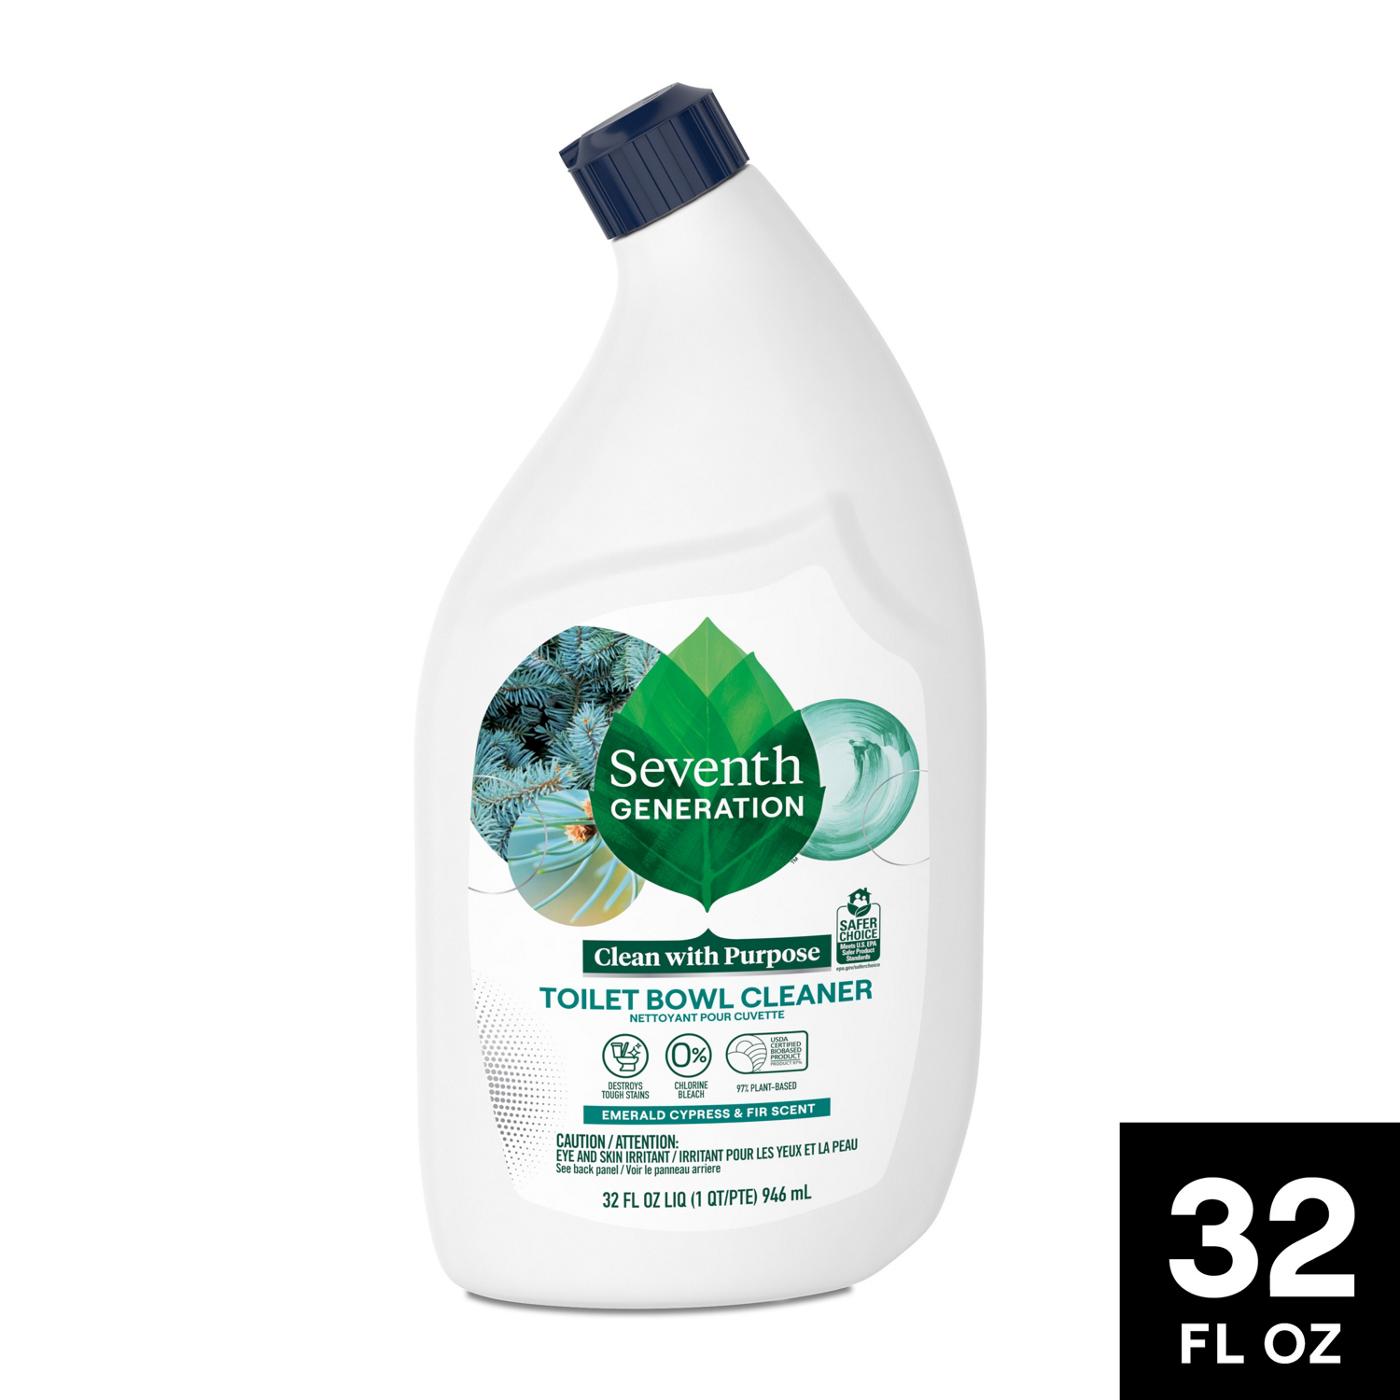 Seventh Generation Emerald Cypress & Fir Toilet Bowl Cleaner; image 2 of 7